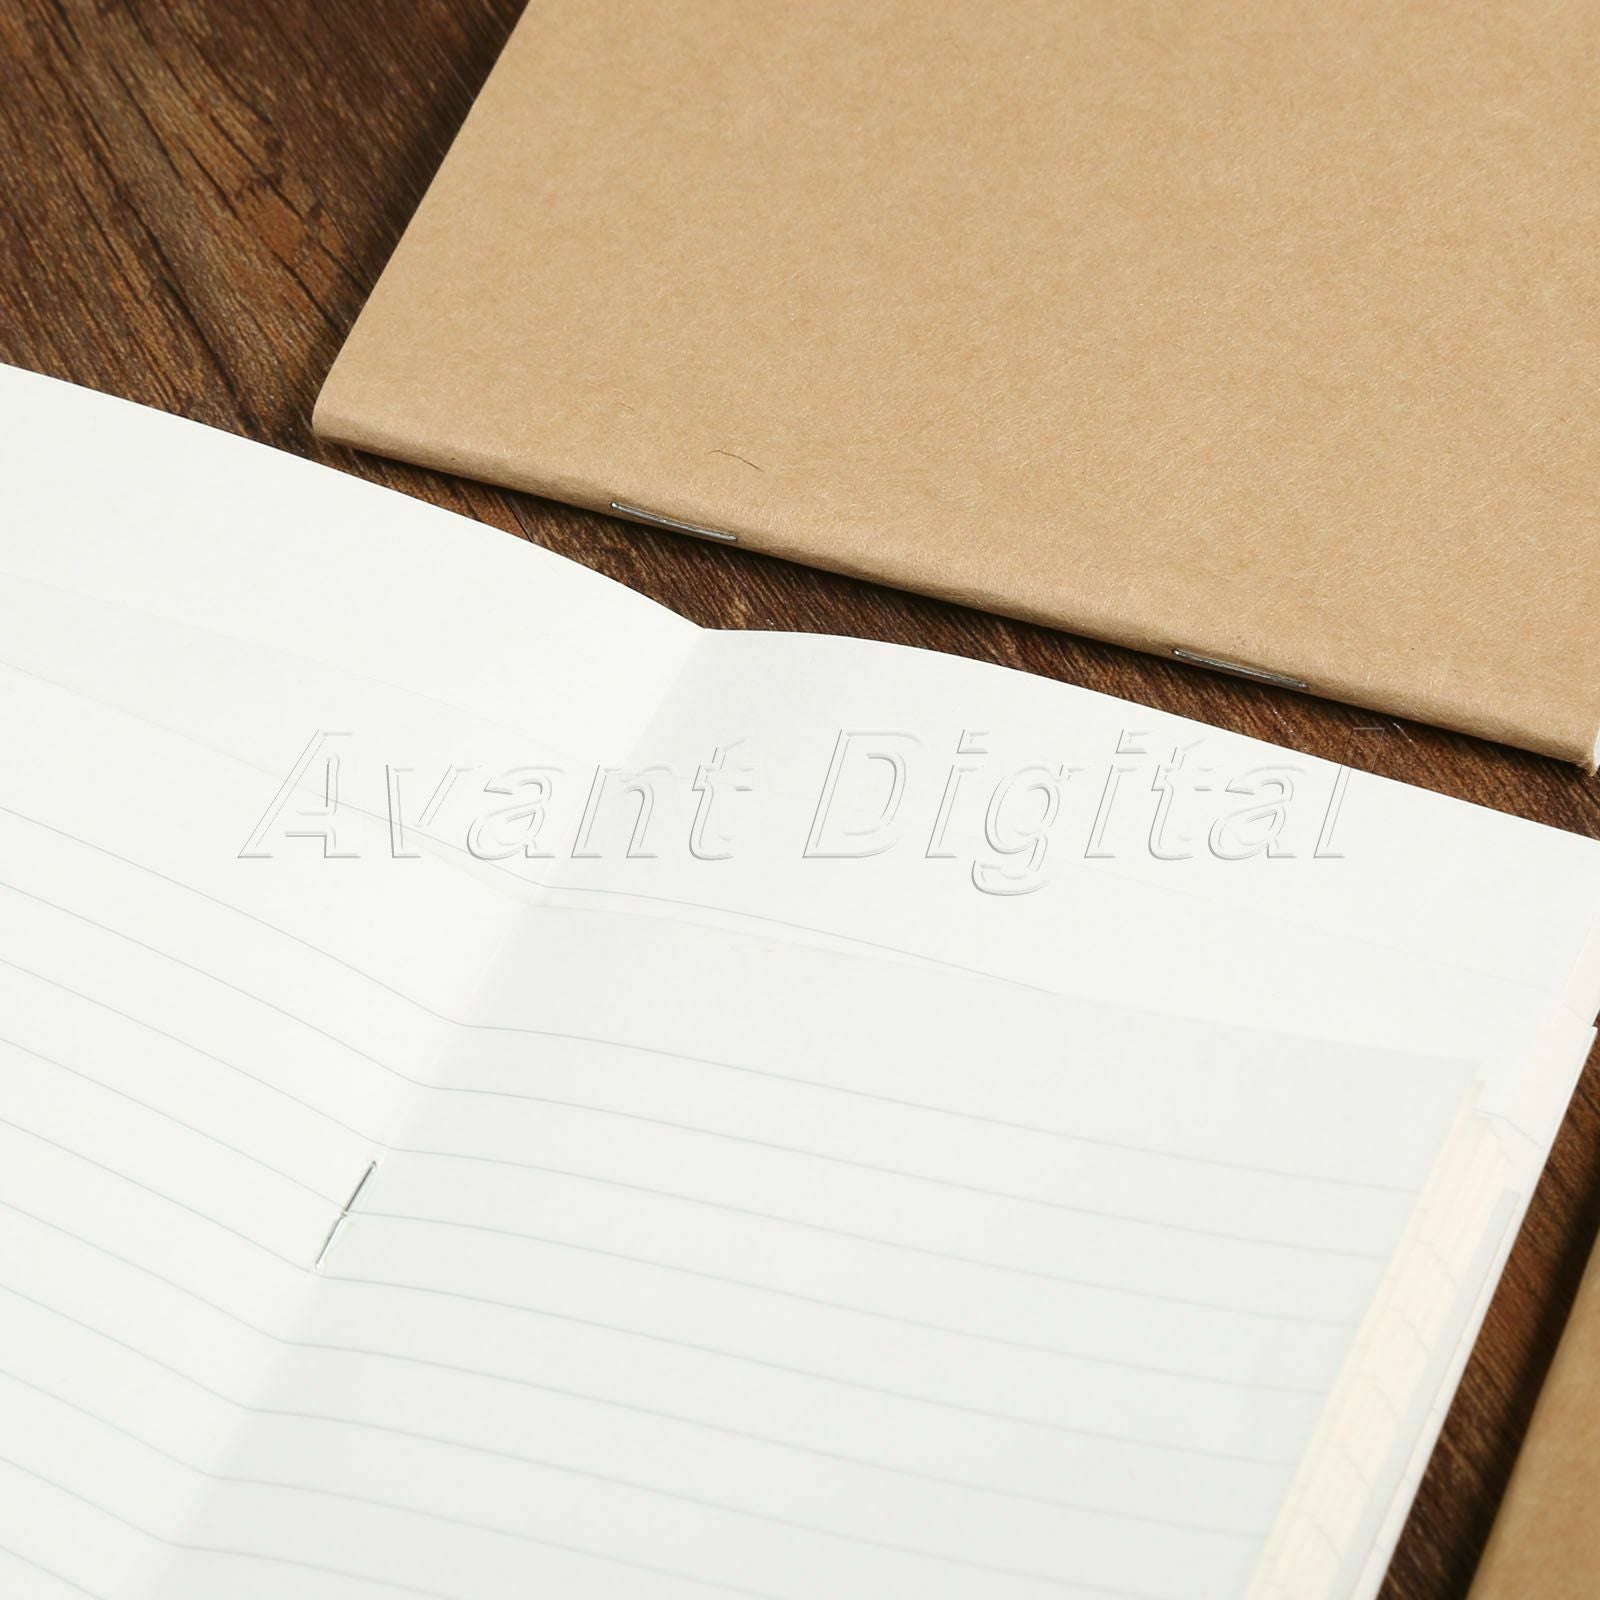 3 Set Blank Paper Refill For Travel Notepad Passport Notebook Diary Memo Journal